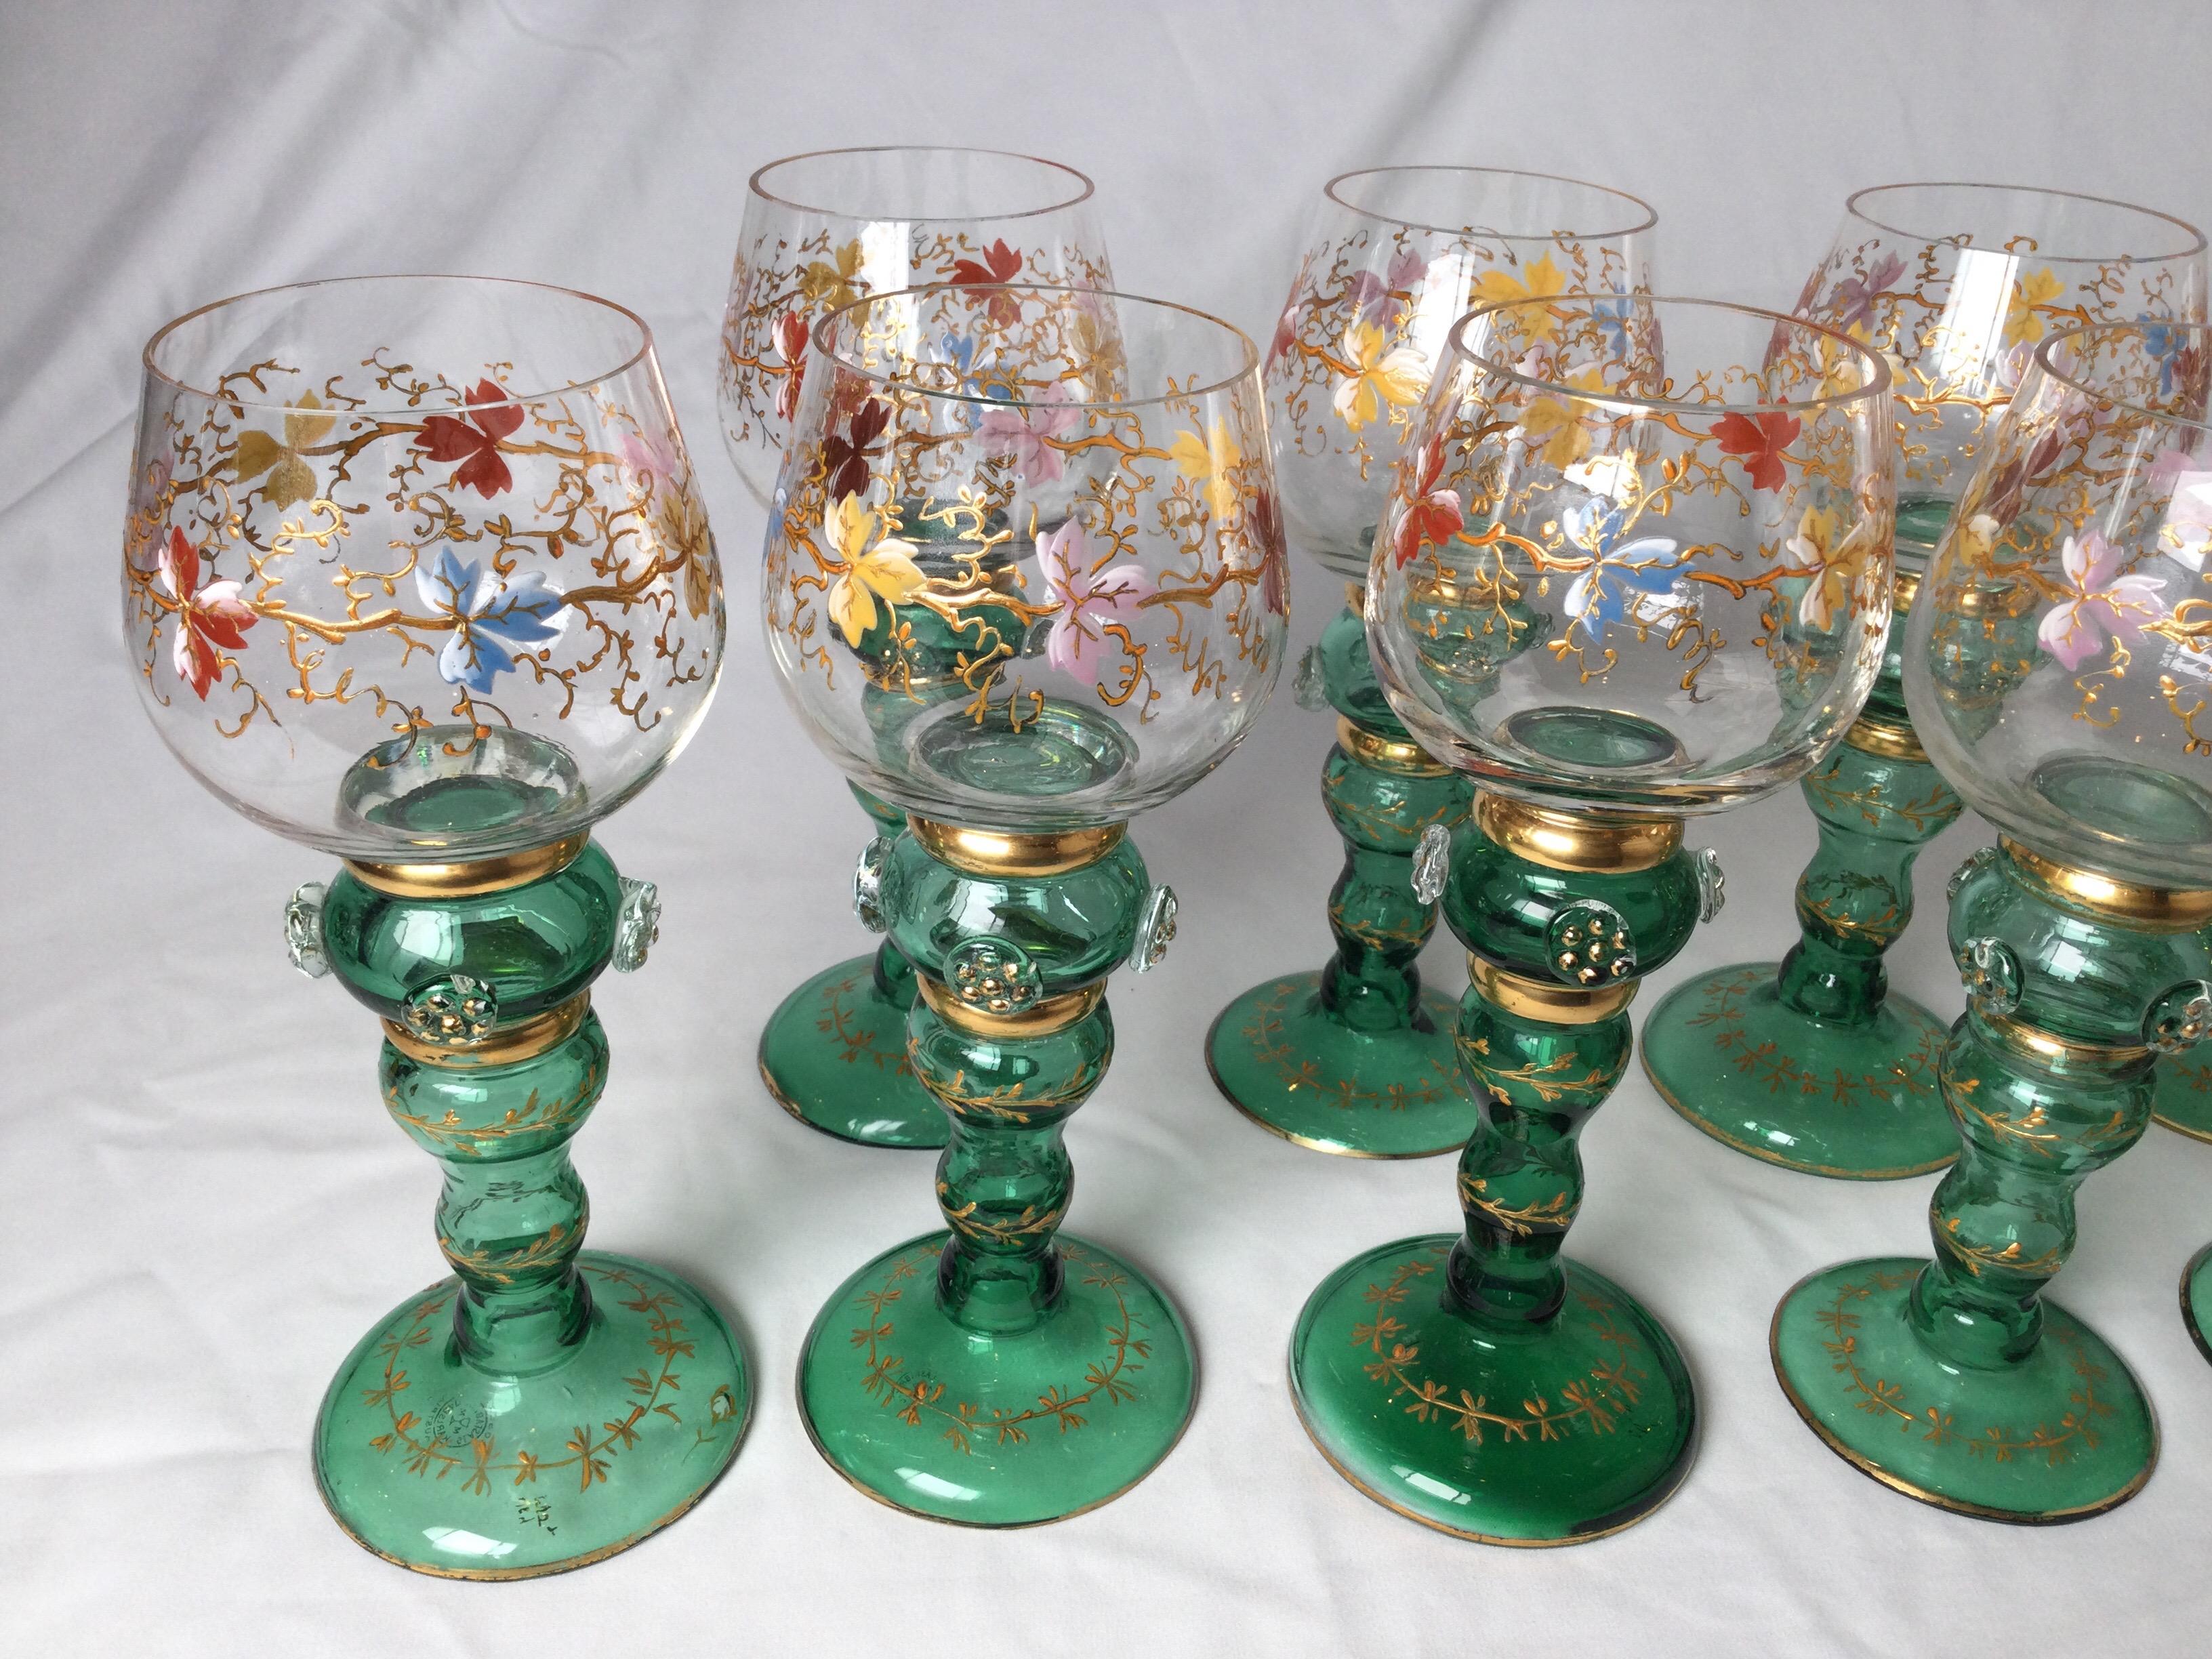 Austrian Set of 11 Moser Enameled Hand Painted Hand Blown Glass Wine Glasses